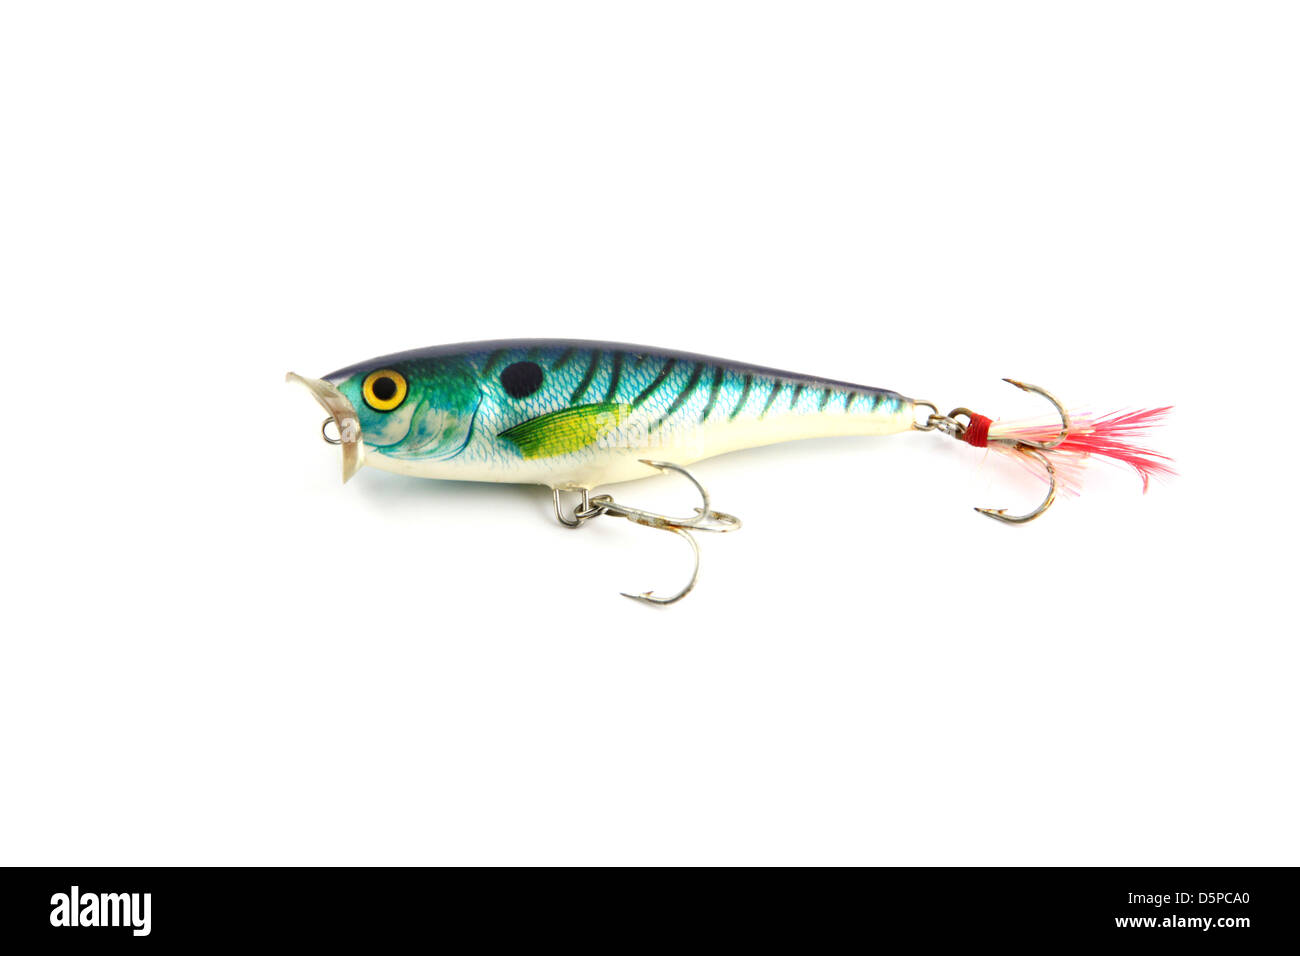 Focus The Lure Poper 3D is fishing on white Background. Stock Photo